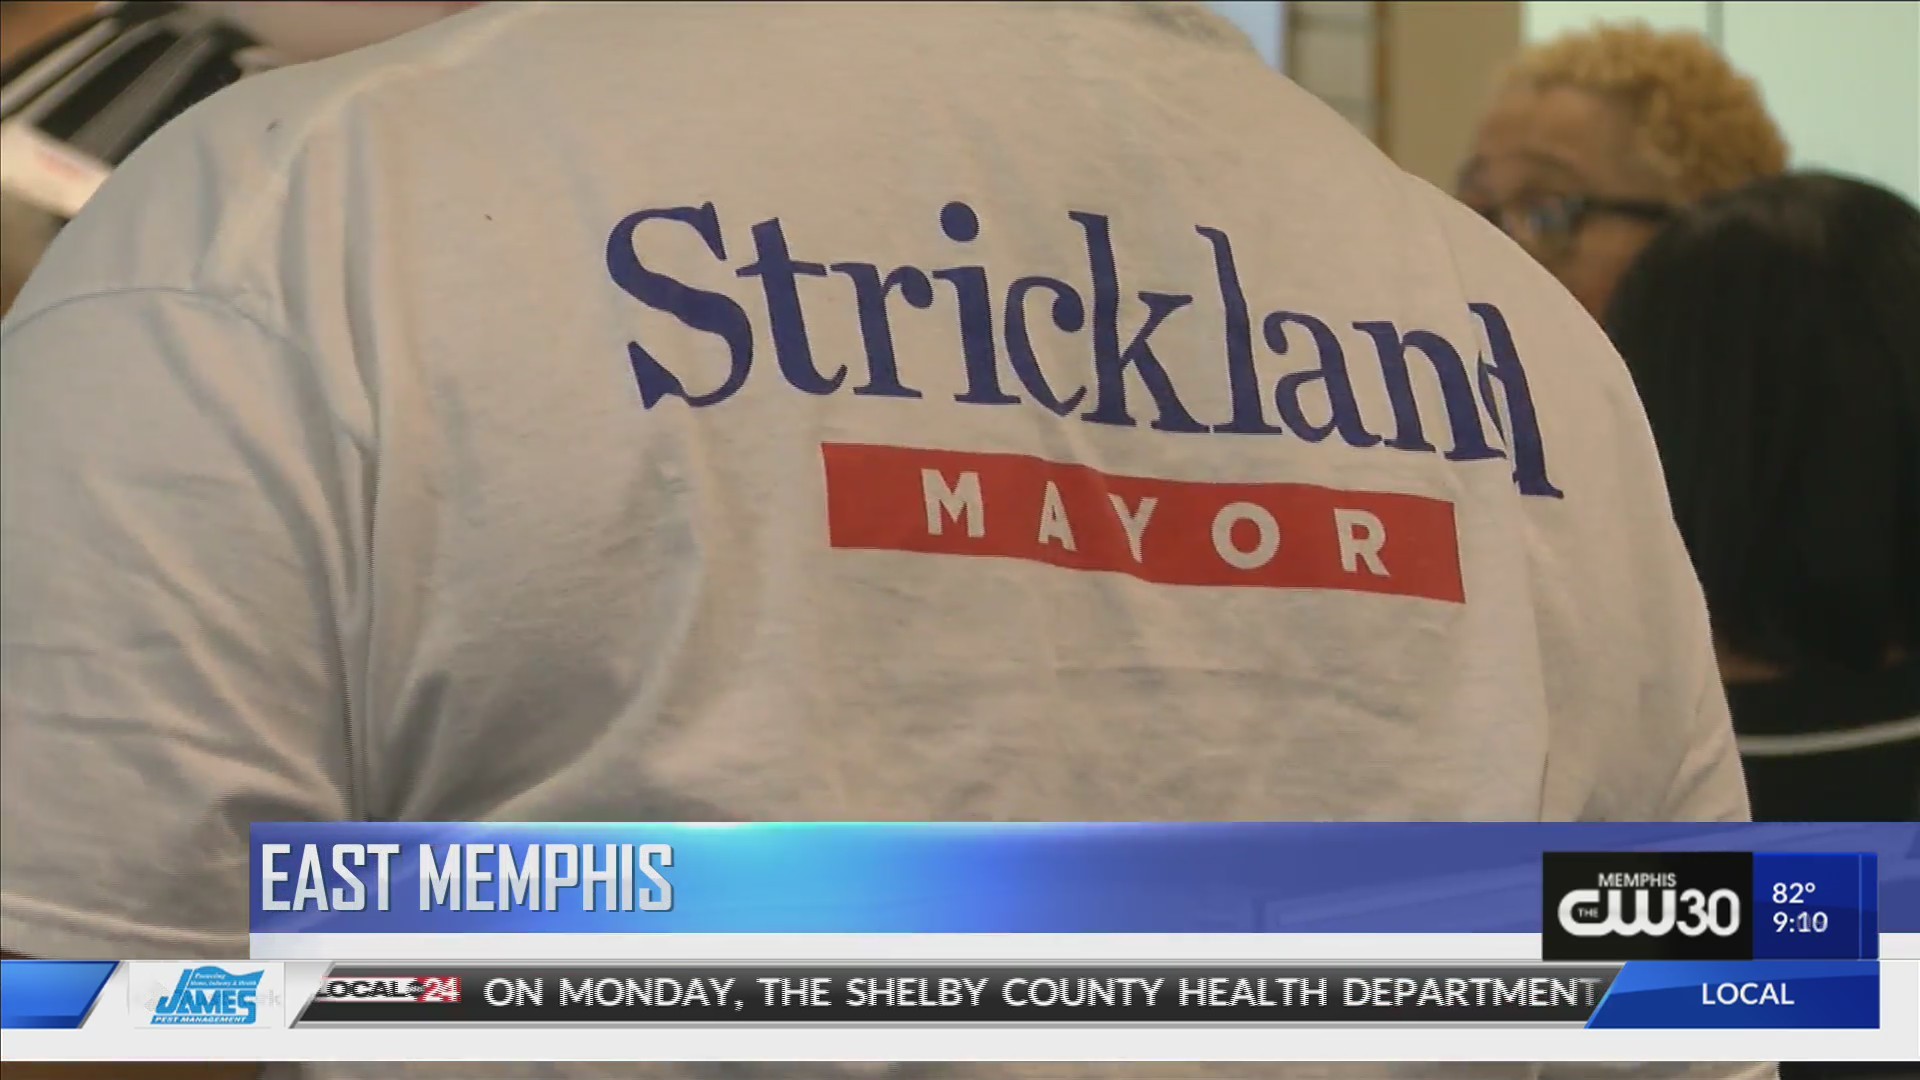 mayoral candidates final stretch of campaigning before voting starts